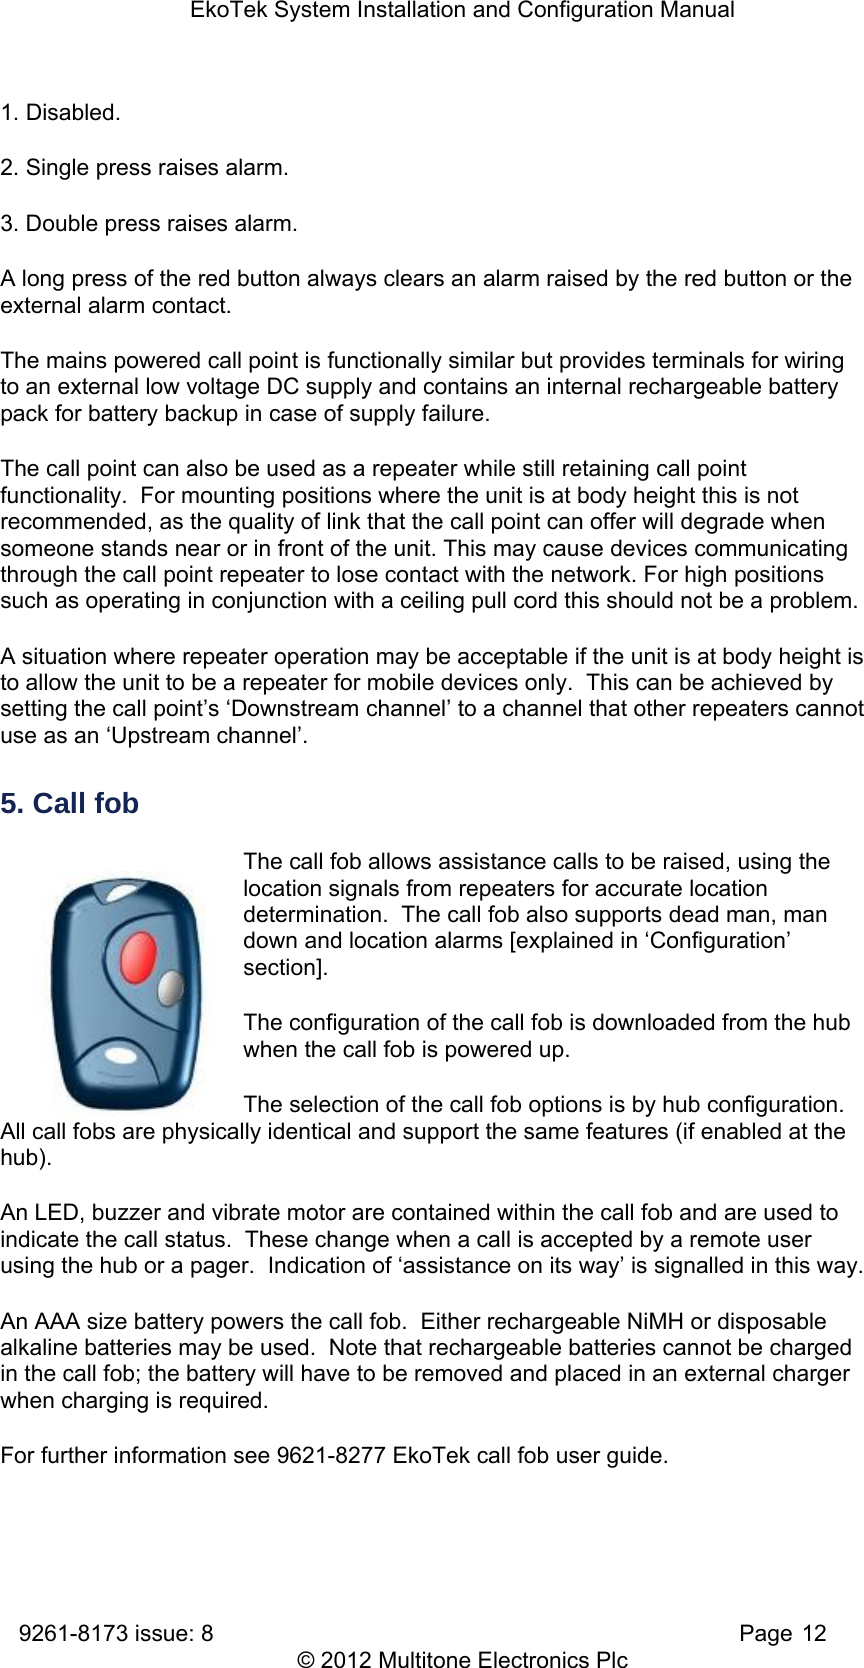 EkoTek System Installation and Configuration Manual 9261-8173 issue: 8   Page 12 © 2012 Multitone Electronics Plc 1. Disabled.  2. Single press raises alarm.  3. Double press raises alarm. A long press of the red button always clears an alarm raised by the red button or the external alarm contact. The mains powered call point is functionally similar but provides terminals for wiring to an external low voltage DC supply and contains an internal rechargeable battery pack for battery backup in case of supply failure. The call point can also be used as a repeater while still retaining call point functionality.  For mounting positions where the unit is at body height this is not recommended, as the quality of link that the call point can offer will degrade when someone stands near or in front of the unit. This may cause devices communicating through the call point repeater to lose contact with the network. For high positions such as operating in conjunction with a ceiling pull cord this should not be a problem. A situation where repeater operation may be acceptable if the unit is at body height is to allow the unit to be a repeater for mobile devices only.  This can be achieved by setting the call point’s ‘Downstream channel’ to a channel that other repeaters cannot use as an ‘Upstream channel’. 5. Call fob The call fob allows assistance calls to be raised, using the location signals from repeaters for accurate location determination.  The call fob also supports dead man, man down and location alarms [explained in ‘Configuration’ section].  The configuration of the call fob is downloaded from the hub when the call fob is powered up. The selection of the call fob options is by hub configuration.  All call fobs are physically identical and support the same features (if enabled at the hub). An LED, buzzer and vibrate motor are contained within the call fob and are used to indicate the call status.  These change when a call is accepted by a remote user using the hub or a pager.  Indication of ‘assistance on its way’ is signalled in this way. An AAA size battery powers the call fob.  Either rechargeable NiMH or disposable alkaline batteries may be used.  Note that rechargeable batteries cannot be charged in the call fob; the battery will have to be removed and placed in an external charger when charging is required. For further information see 9621-8277 EkoTek call fob user guide. 